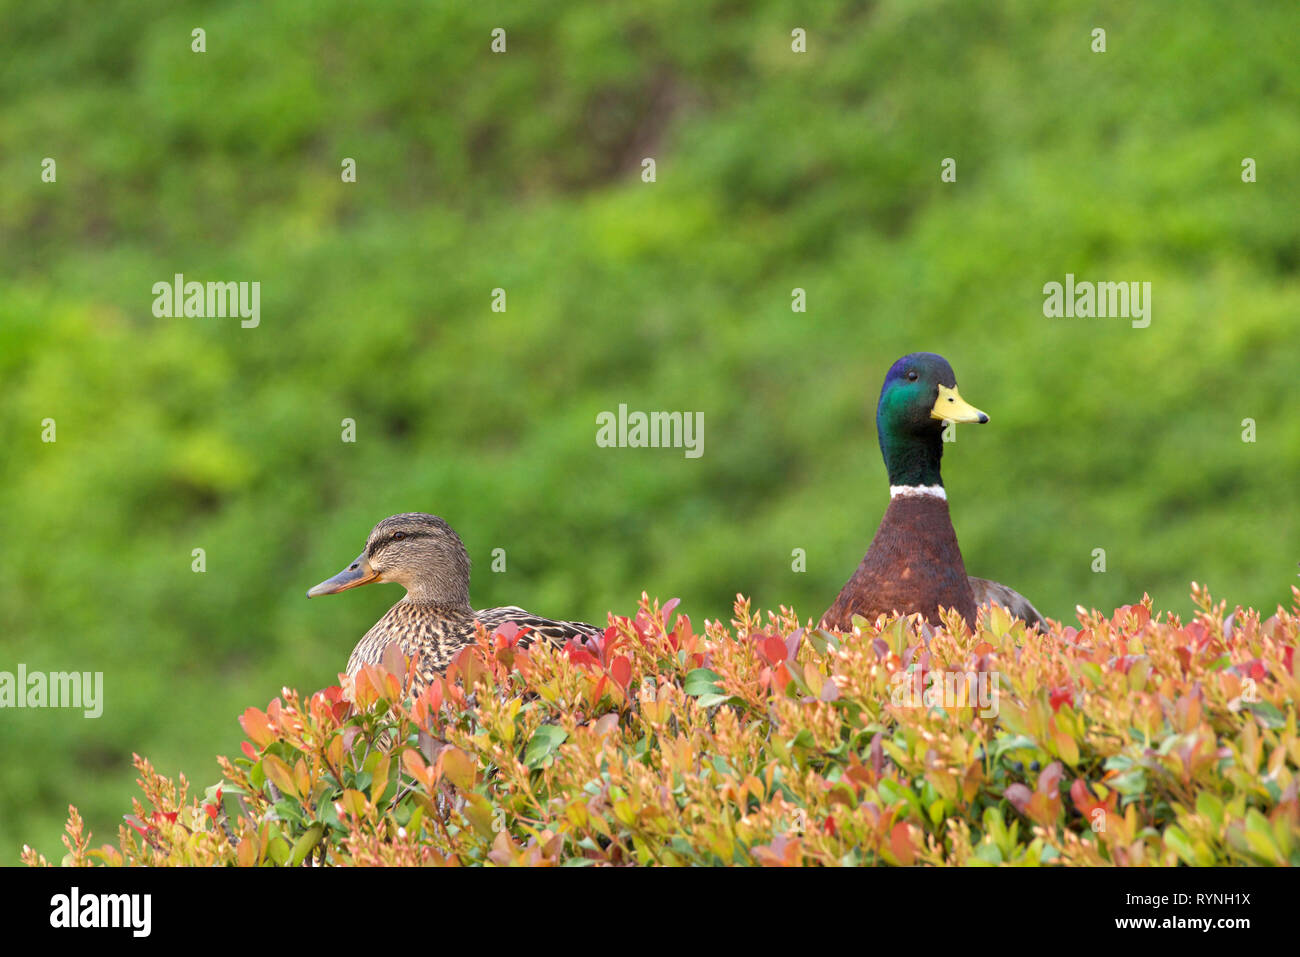 mallard ducks, male and female, heads poking up from behind a bush. The mallard is a common dabbling duck. Stock Photo